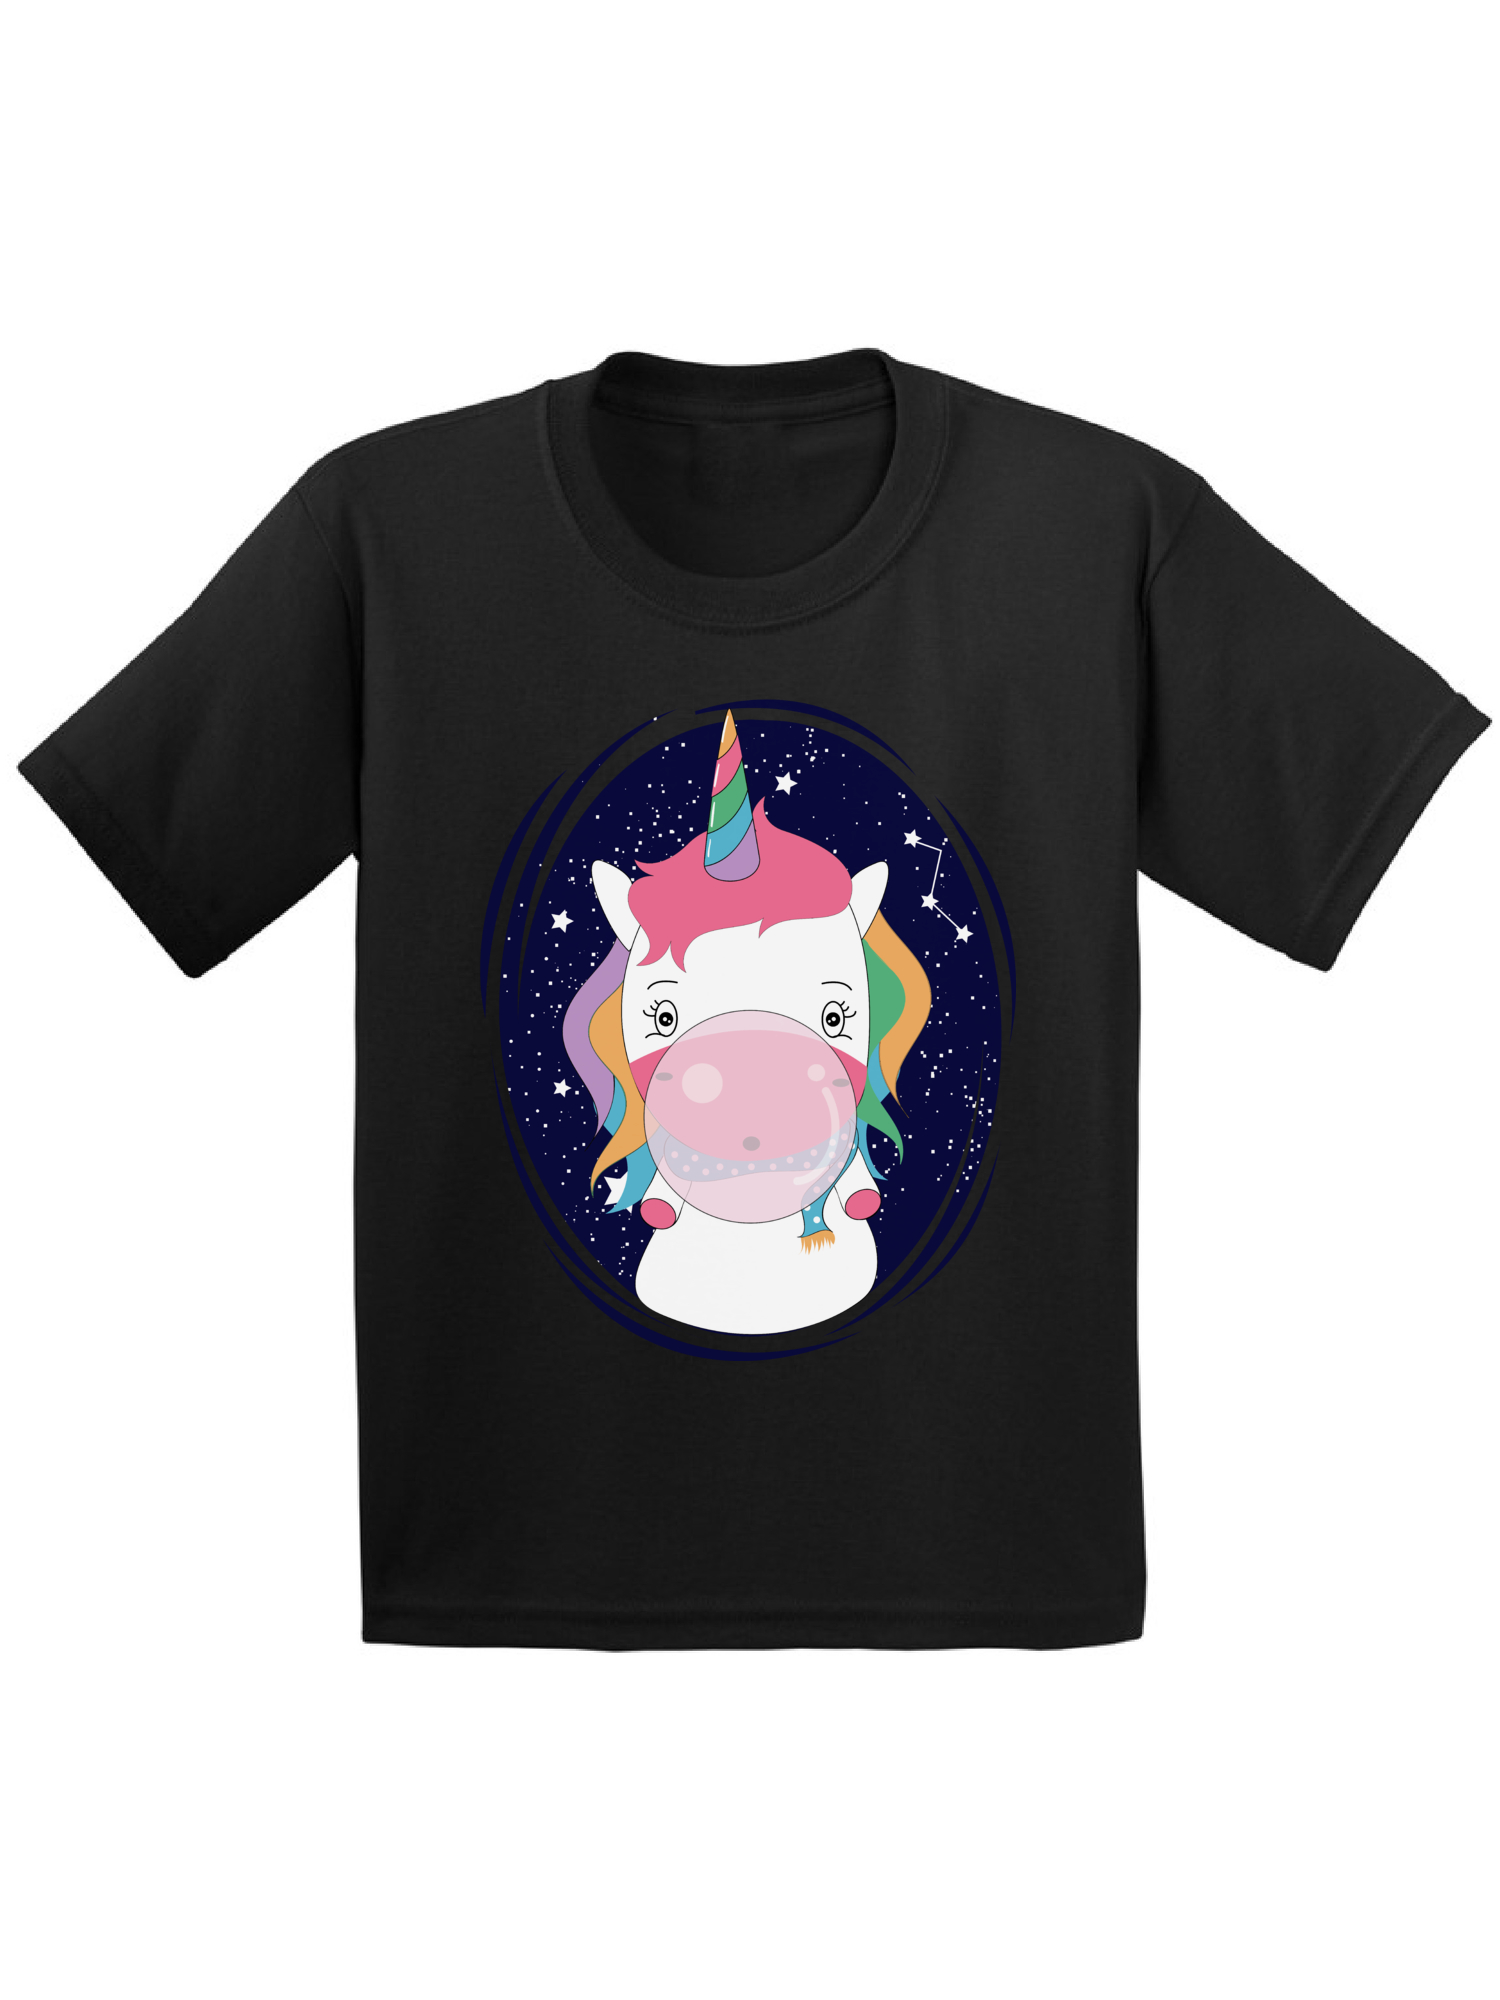 Awkward Styles Unicorn Shirts for Toddlers Cute Unicorn T-shirts Birthday Gifts for Kids Unicorn Birthday Party T-shirt Unicorn Chewing a Gum Shirt Gift for 1 Year Old Clothing for Boys and Girls - image 1 of 4